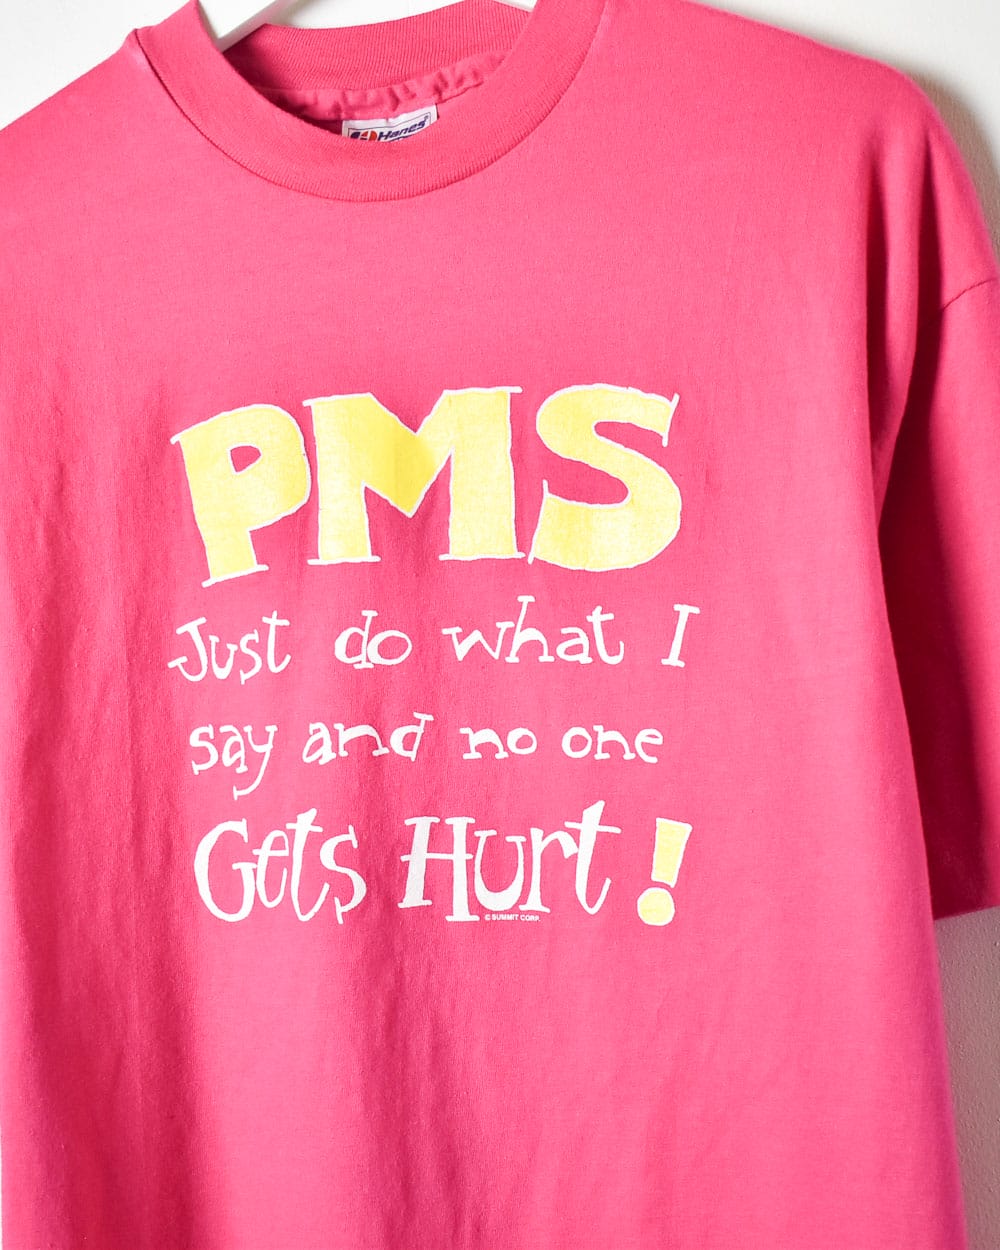 Pink PMS Just Do What I Say And No One Gets Hurt Single Stitch T-Shirt - Large